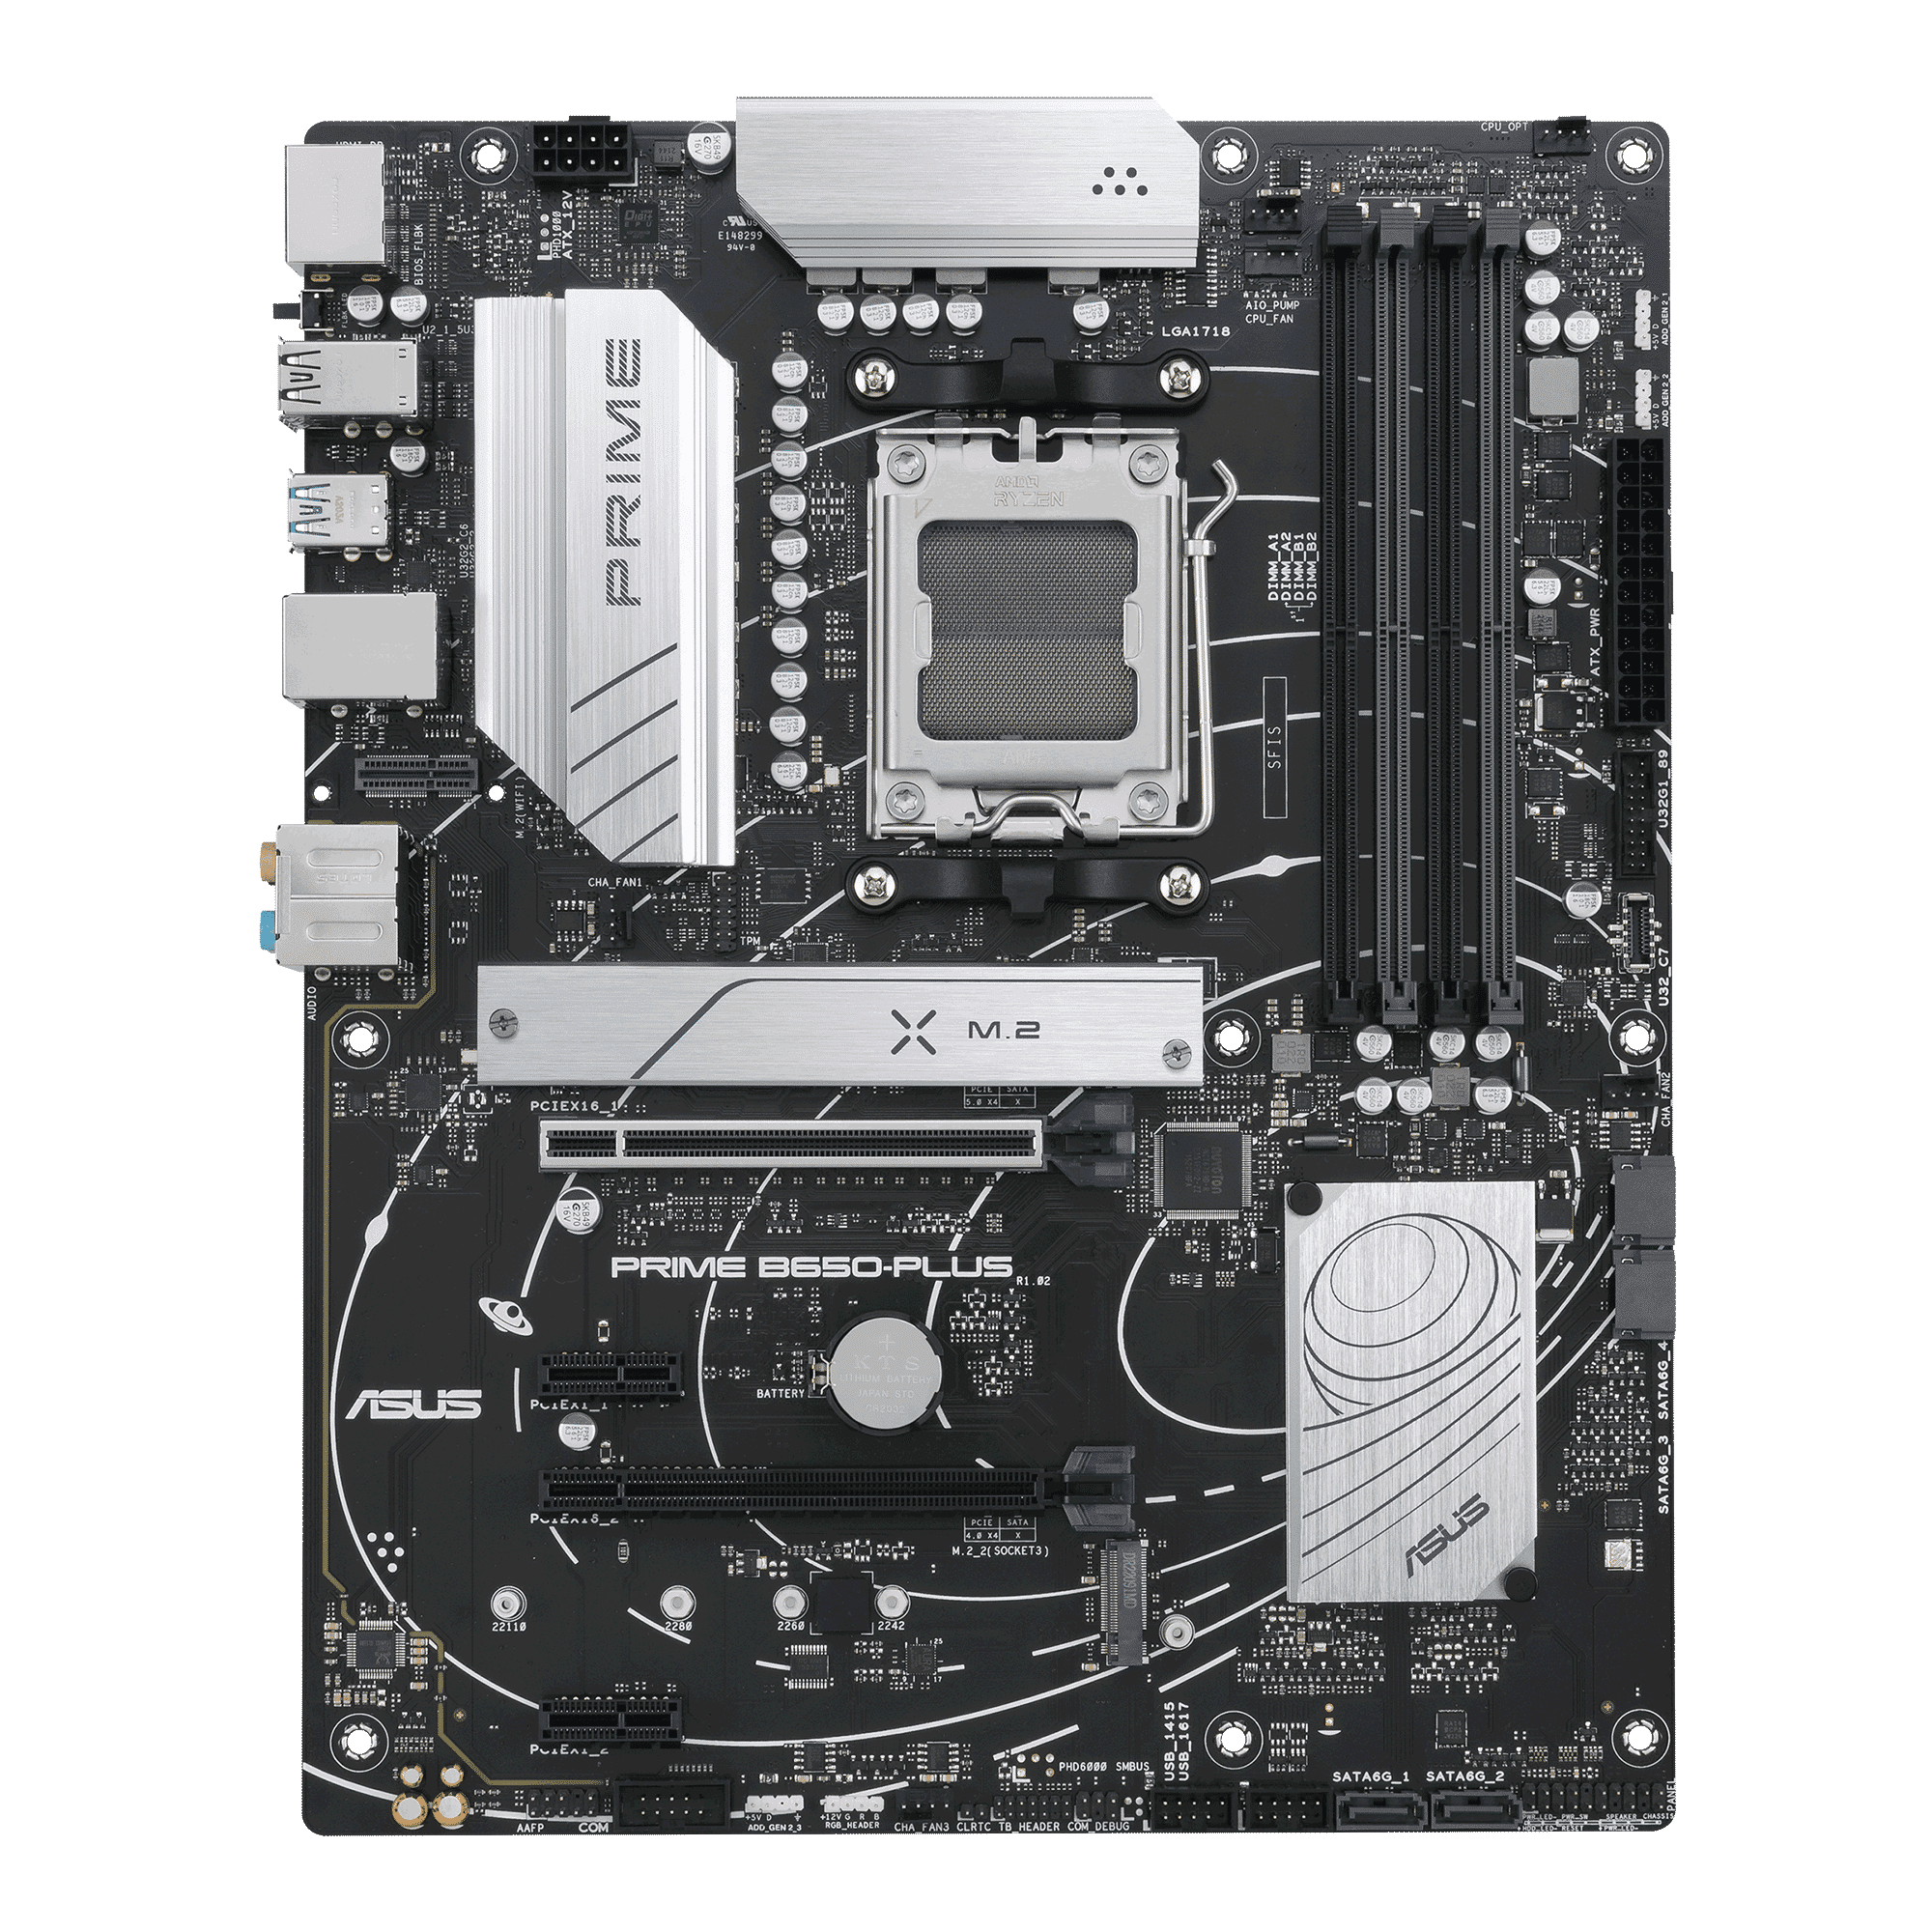 ASUS Introduces Four New AMD B650 Motherboard Series 33